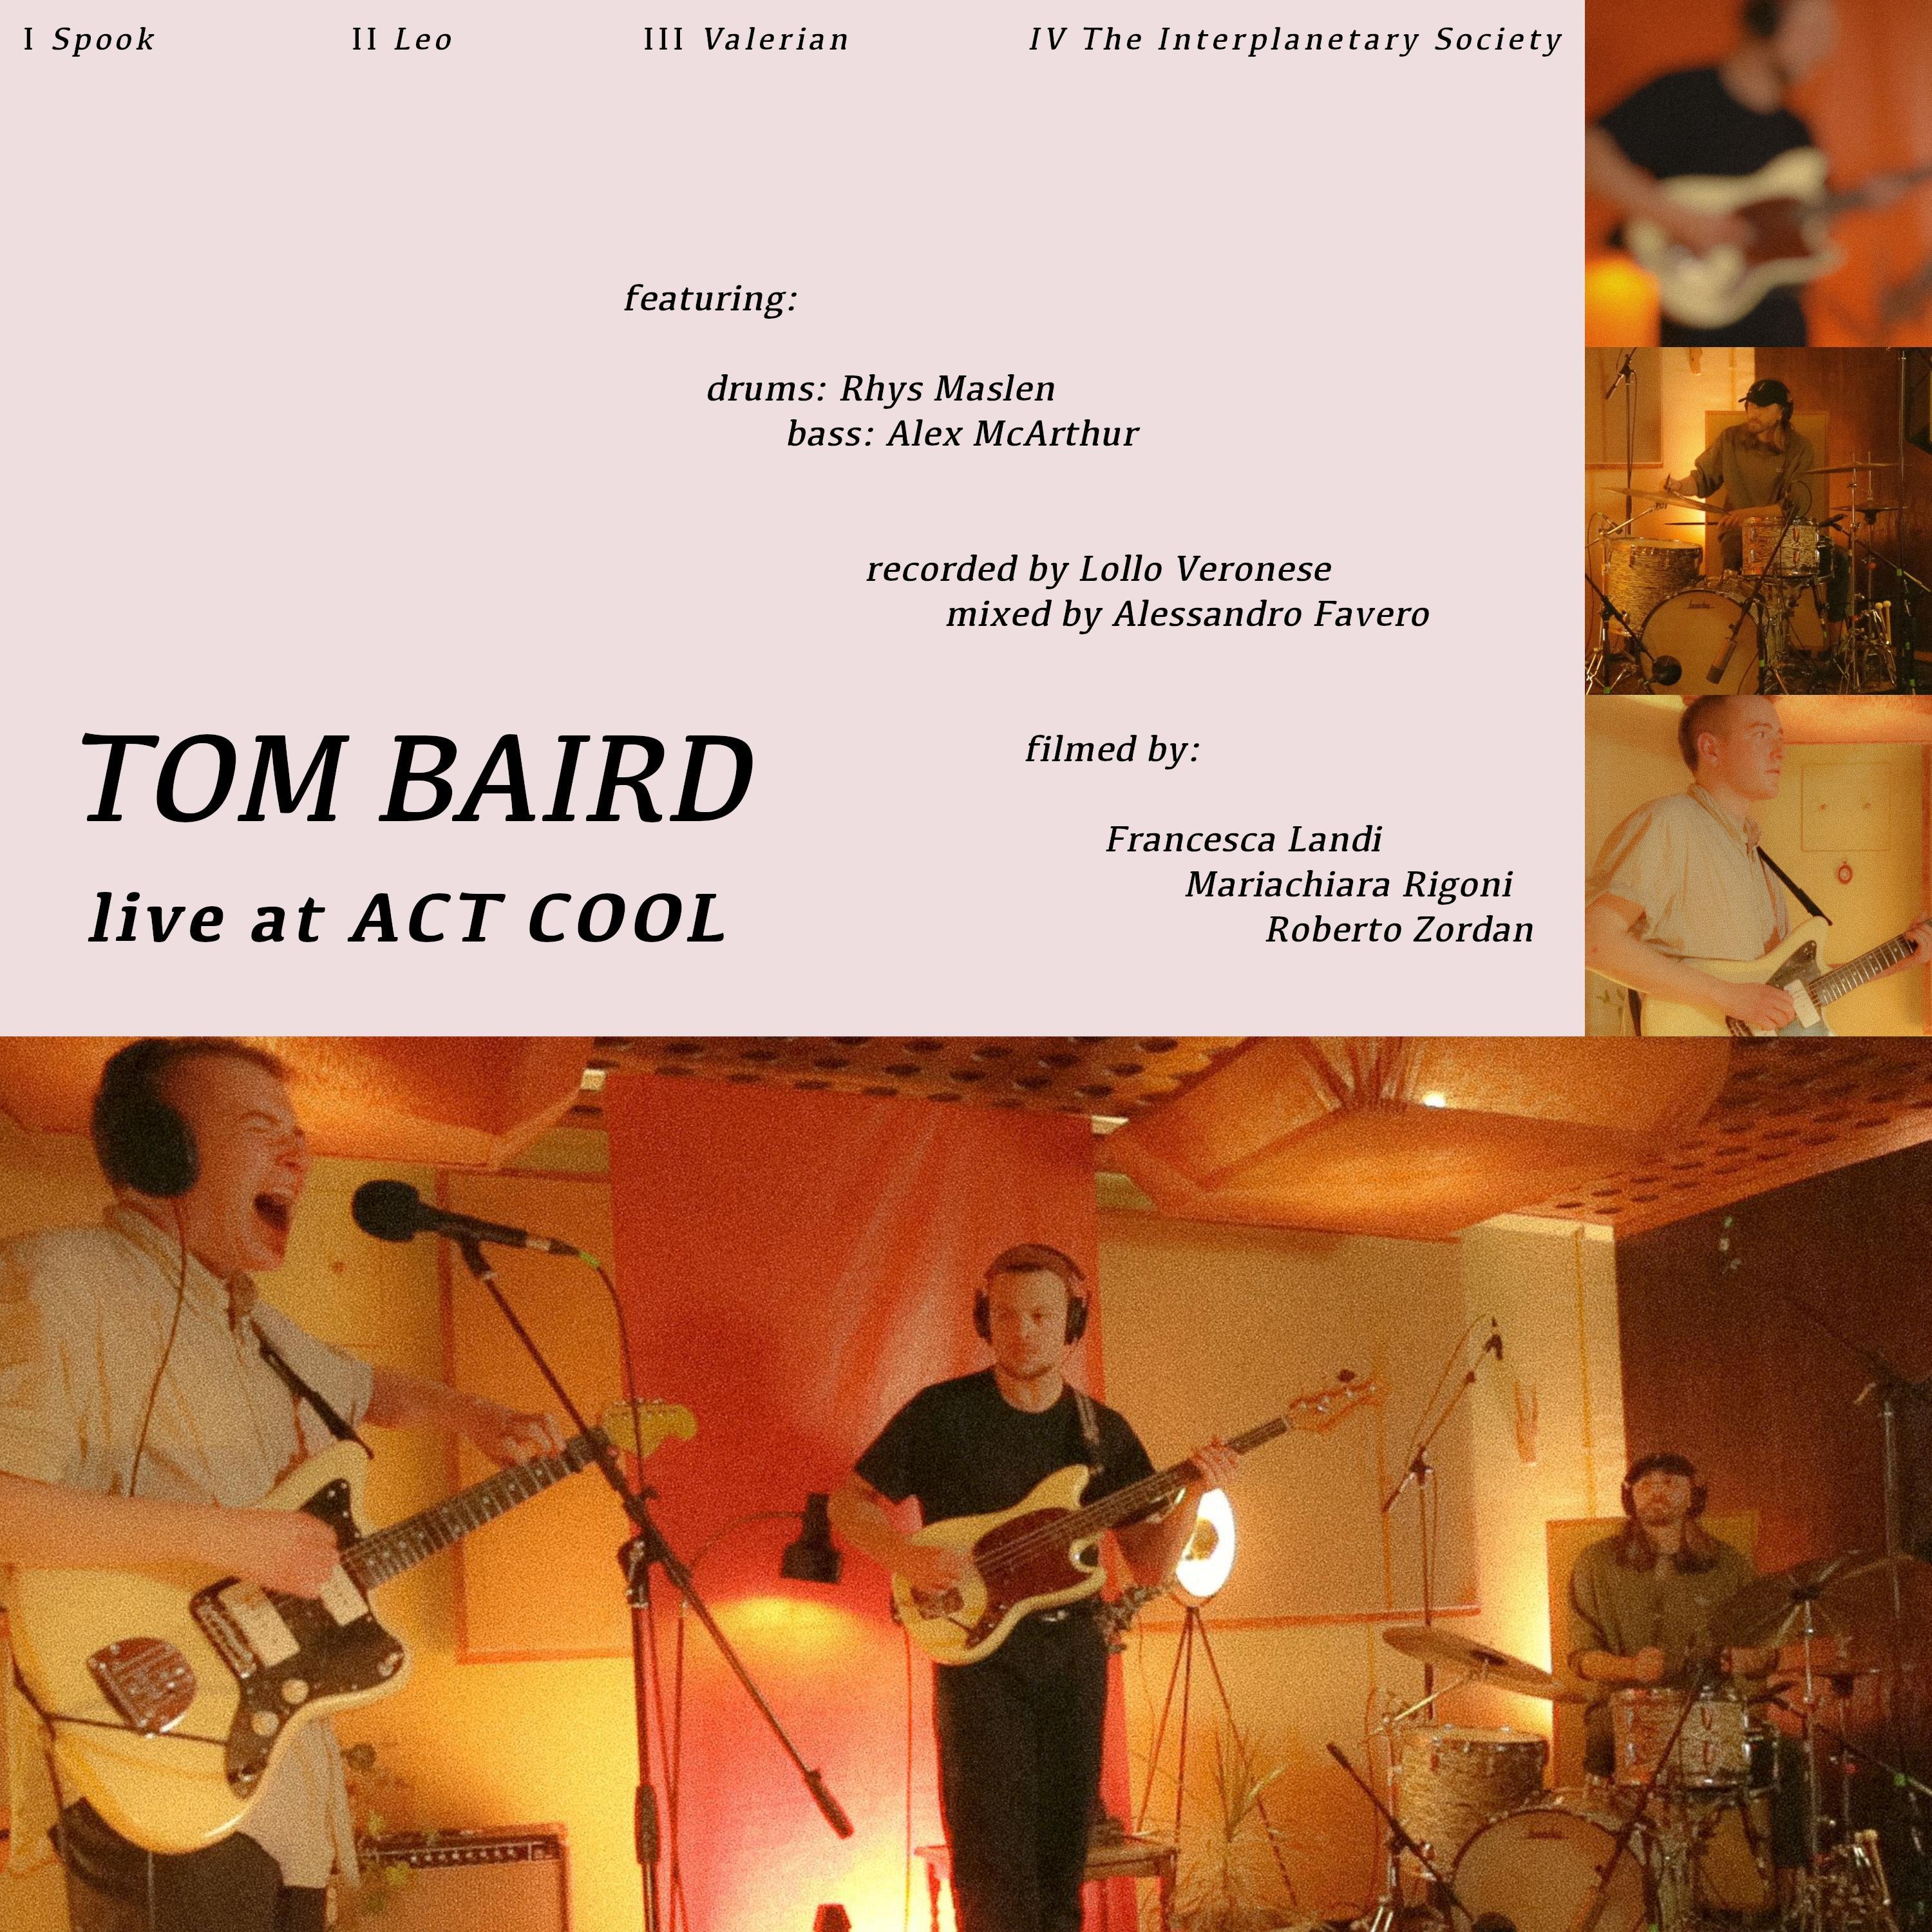 Tom Baird - Spook (Live at Act Cool)